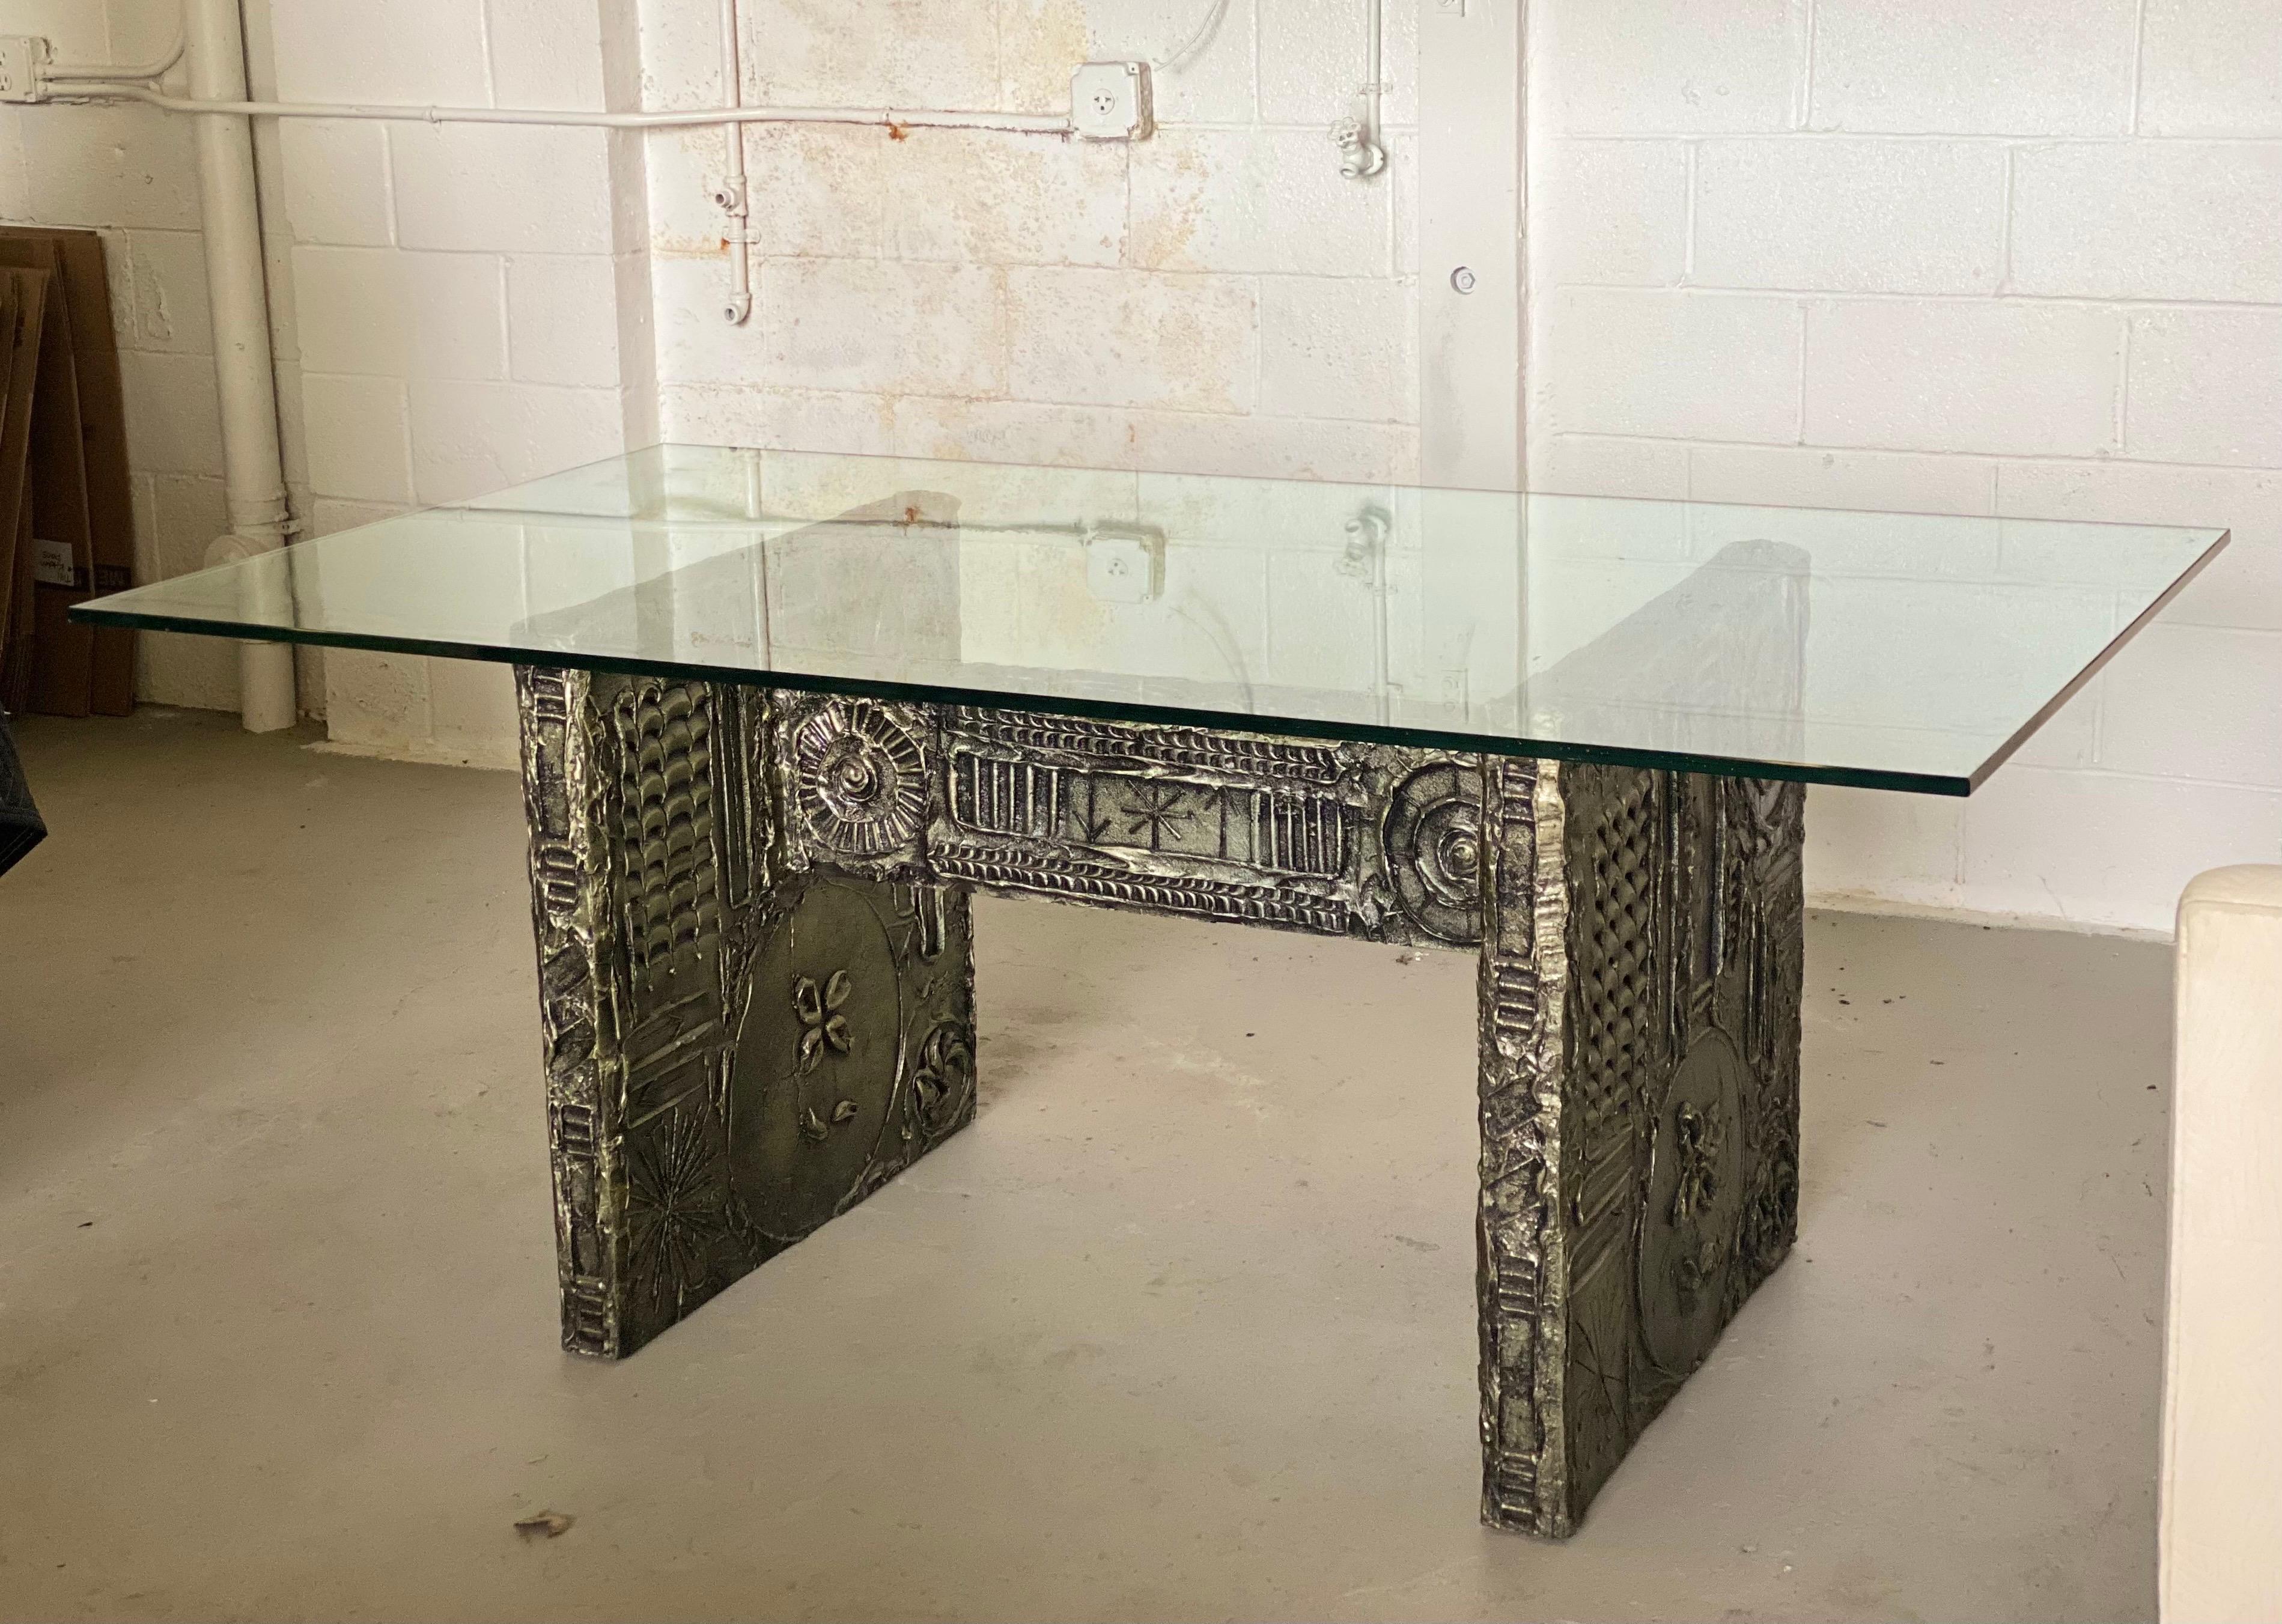 We are very pleased to offer a stunning table by American architect and furniture designer Adrian Pearsall, circa the 1960s. Inspired by Paul Evans creation of metal-sculpted furniture, Pearsall designed a Brutalist collection for Craft Associates.